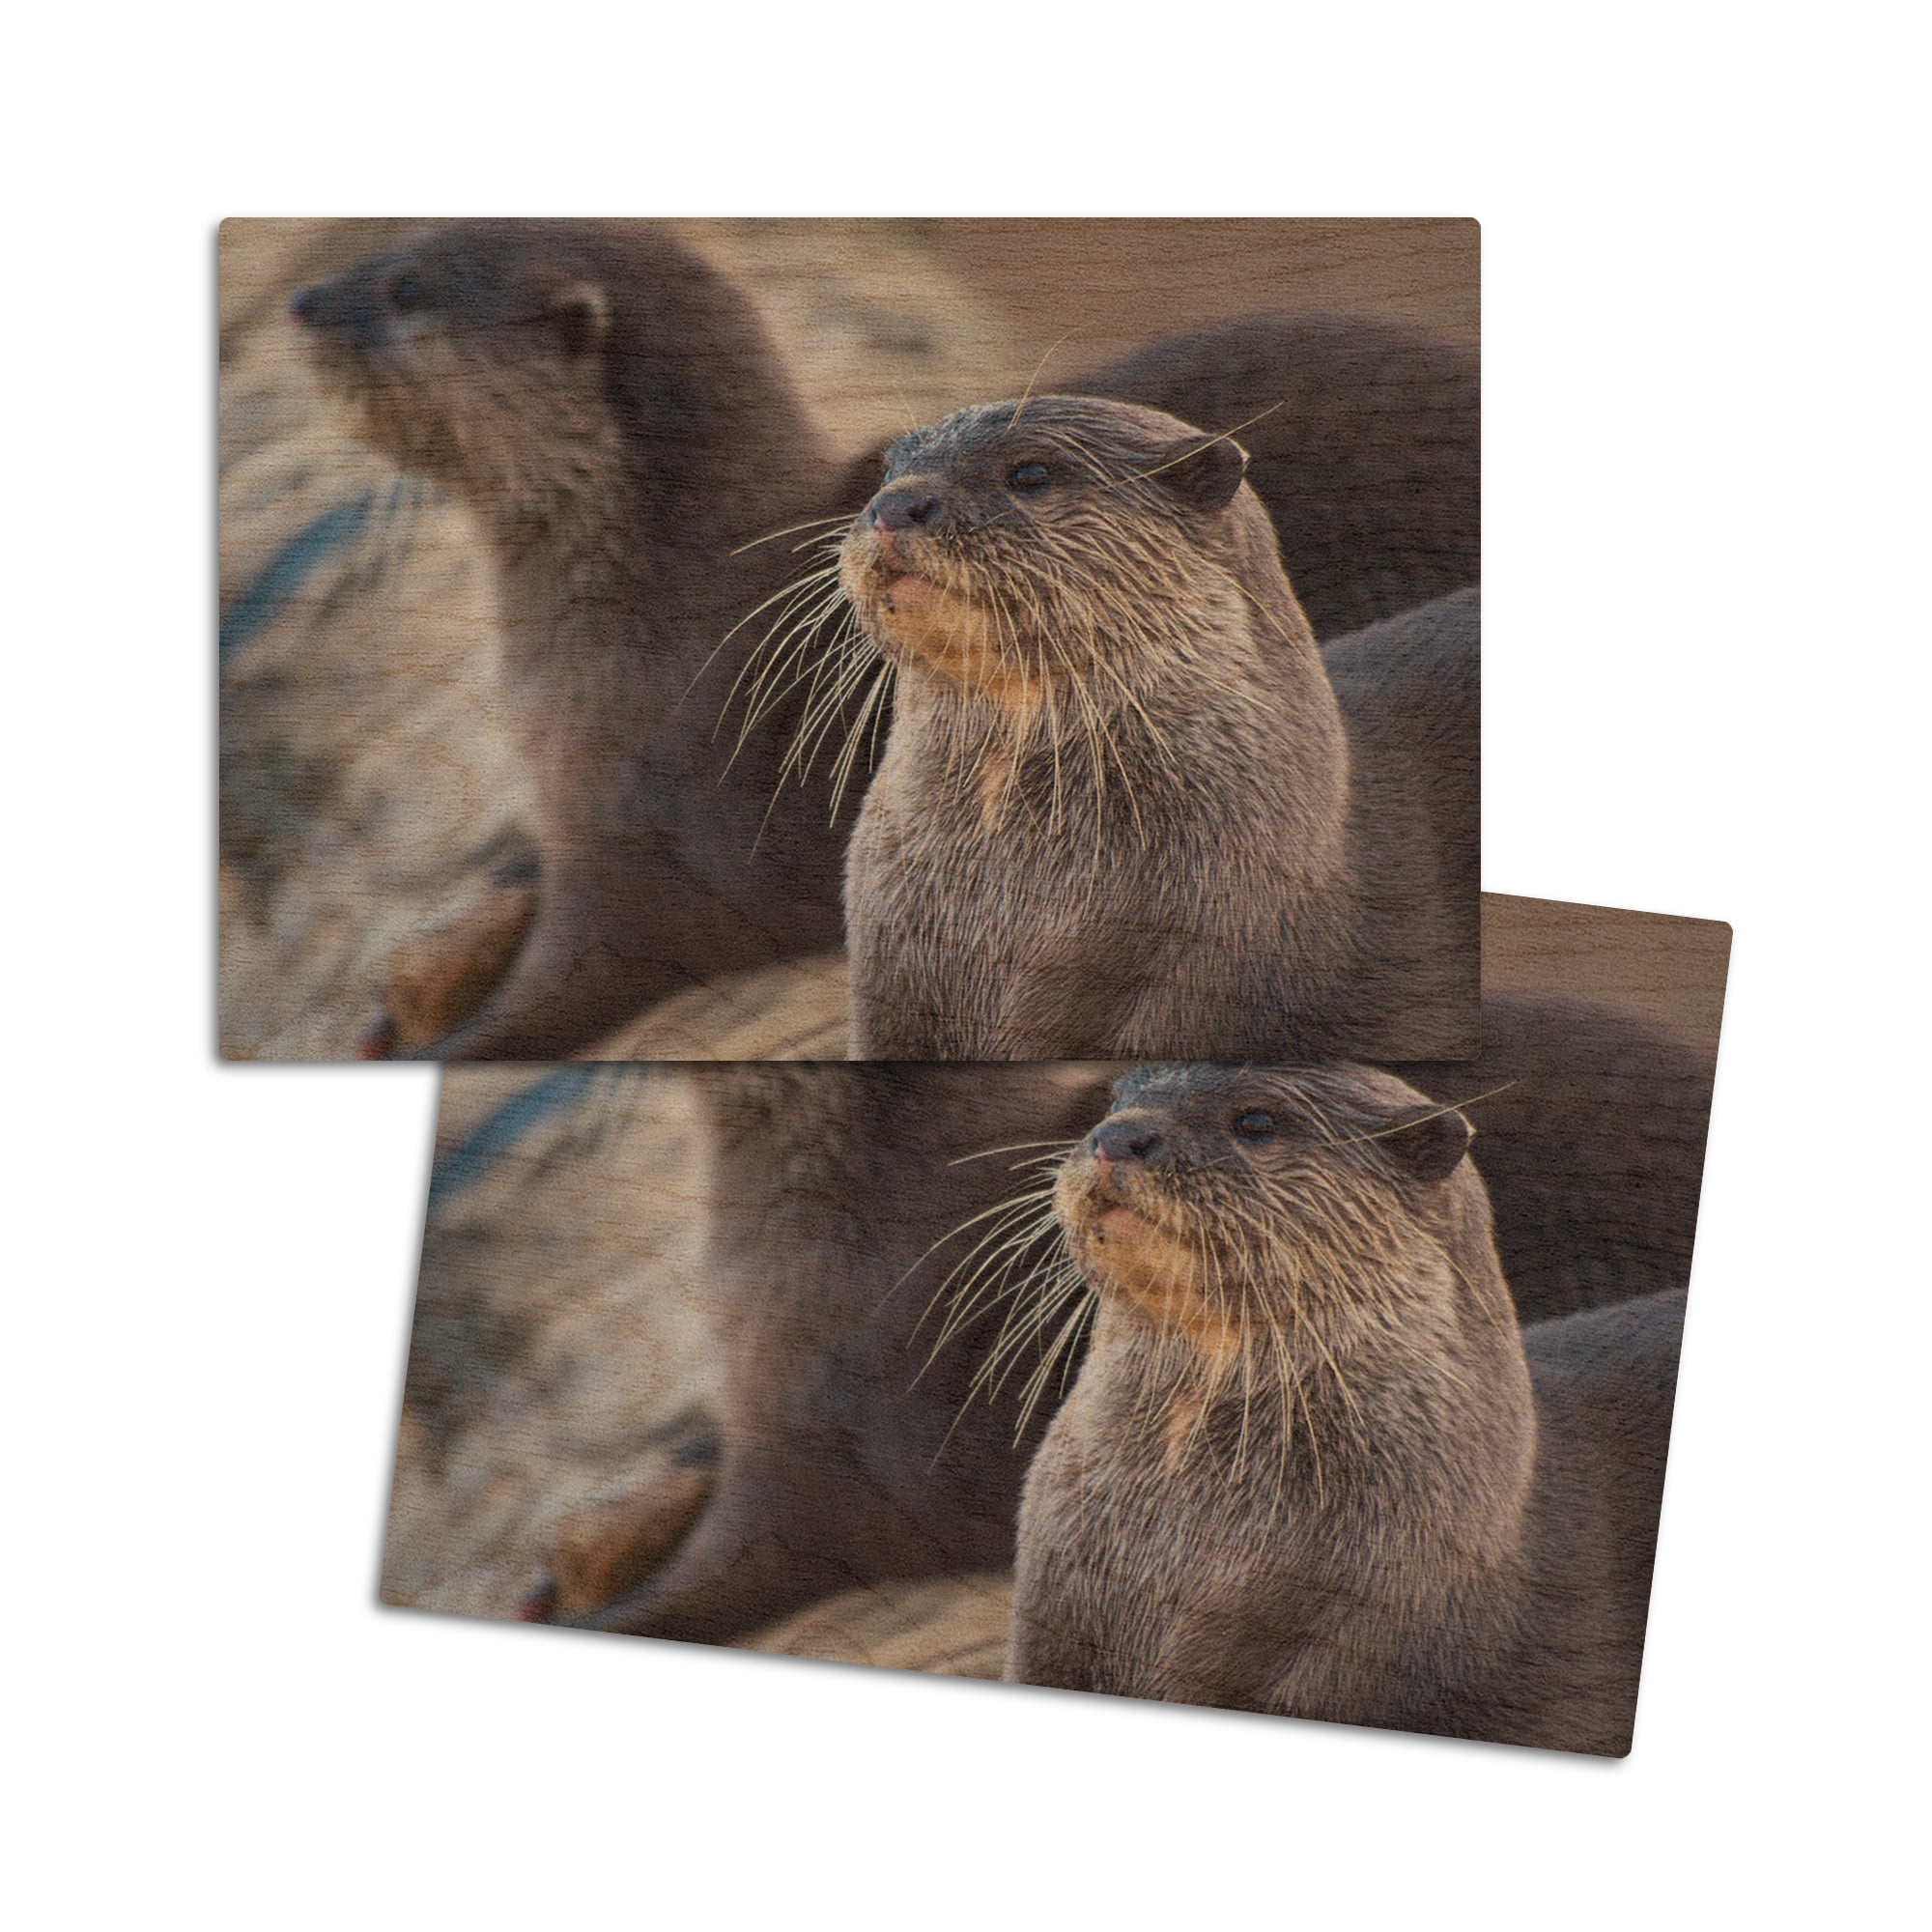 River Otters on Log (4x6 Birch Wood Postcards, 2-Pack Stationary ...